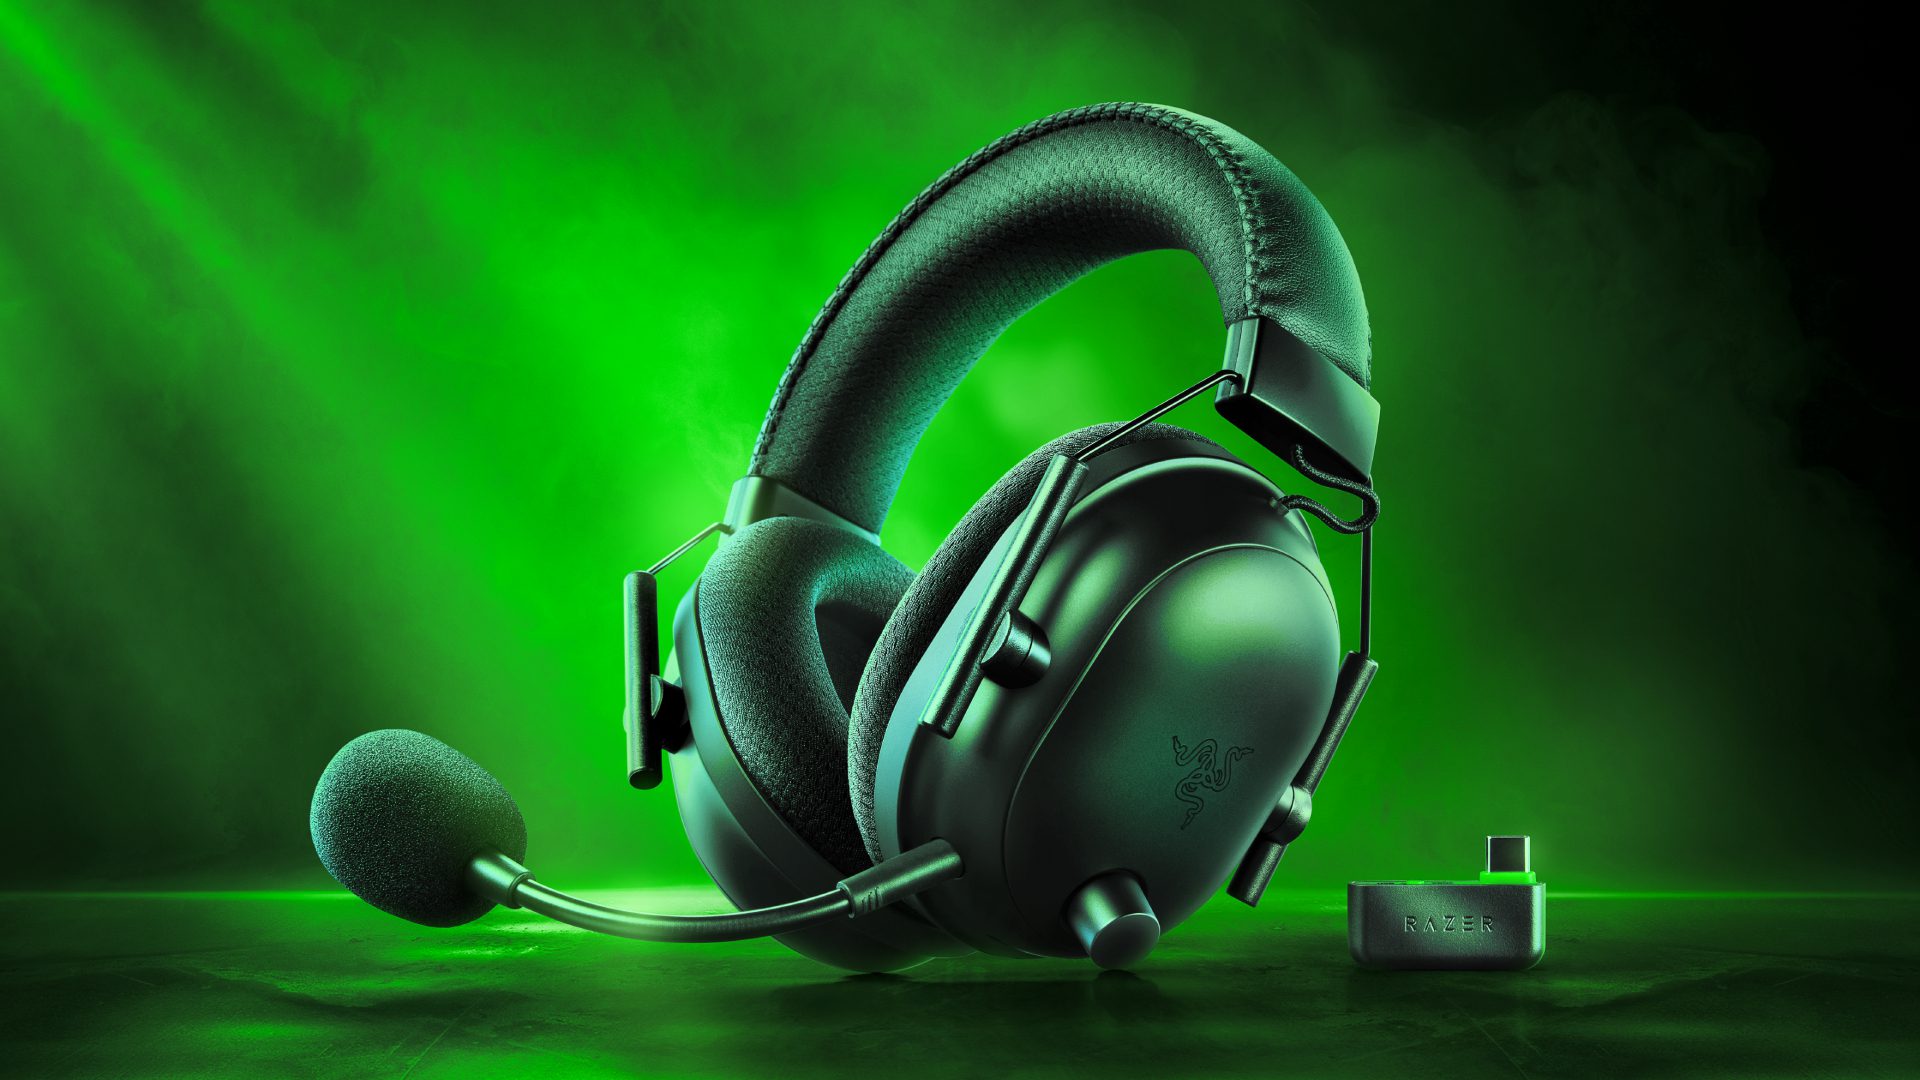 Razer has announced PlayStation and Xbox versions of the excellent BlackShark V2 Pro gaming headset – and they’re available now